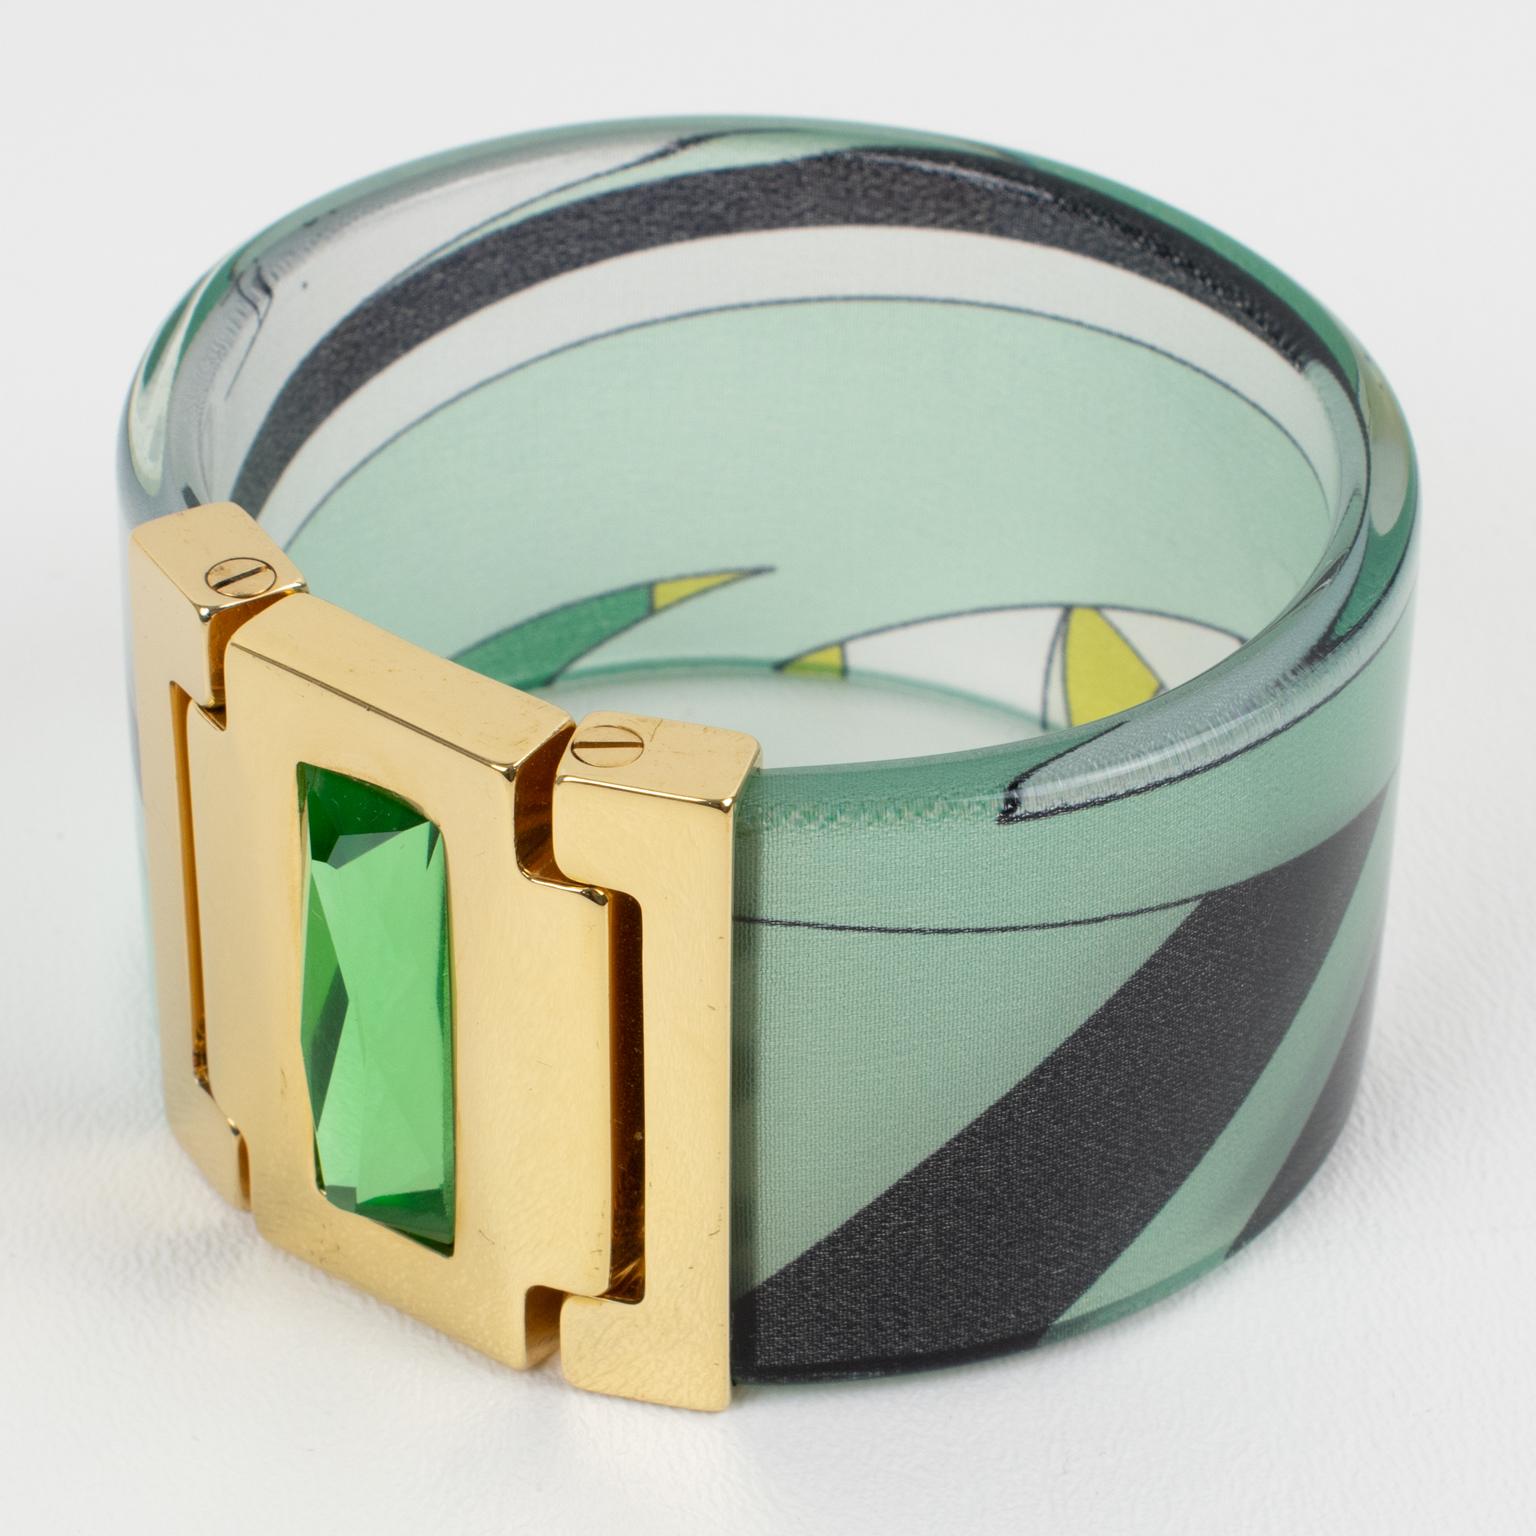 Emilio Pucci Jeweled Bracelet Bangle Lucite with Green and Black Silk Inclusion In Good Condition For Sale In Atlanta, GA